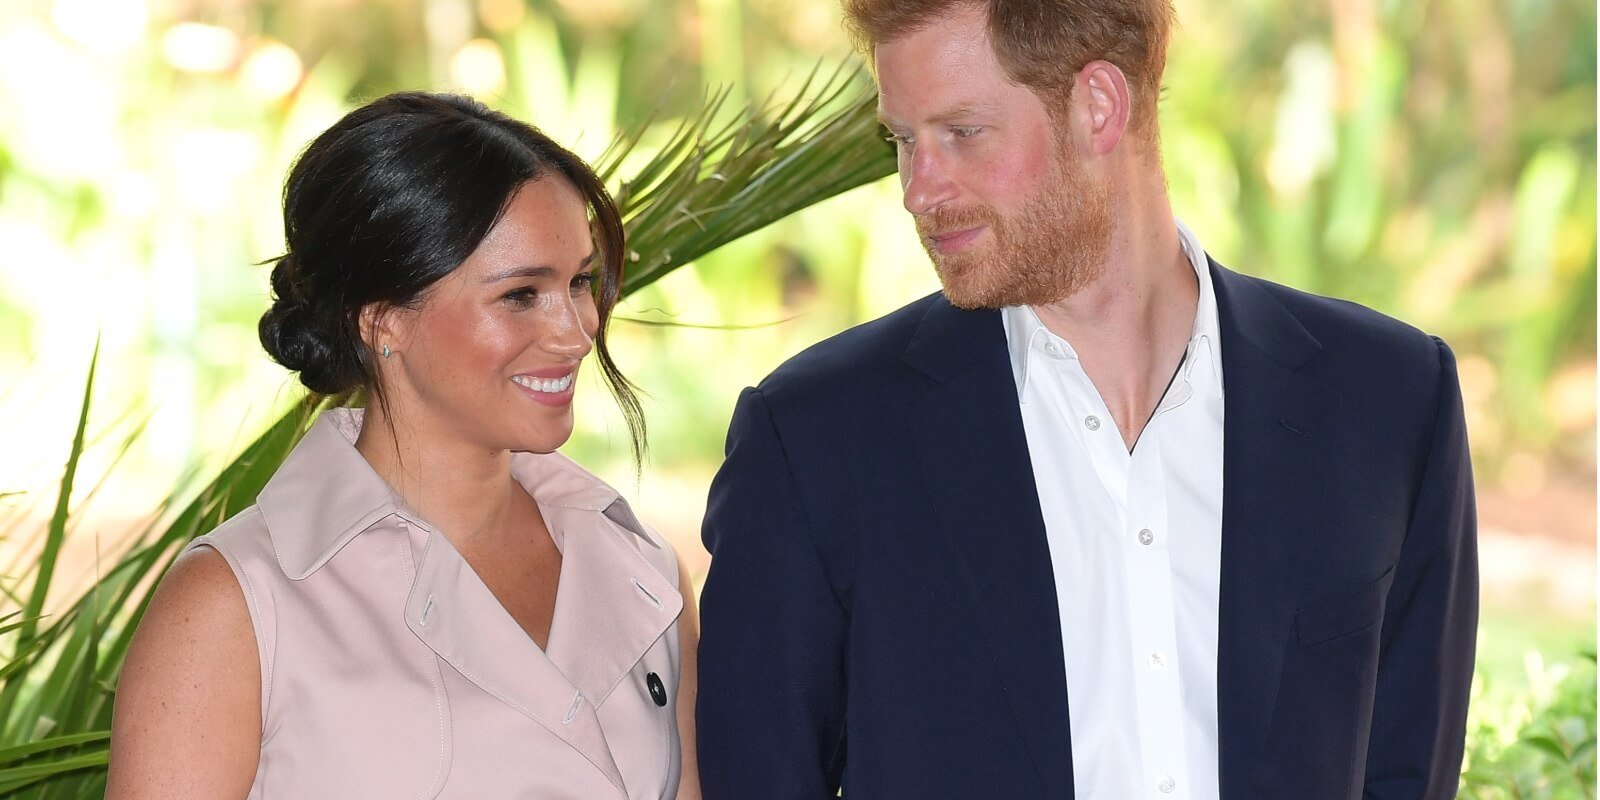 Meghan Markle and Prince Harry on October 02, 2019 in Johannesburg, South Africa.